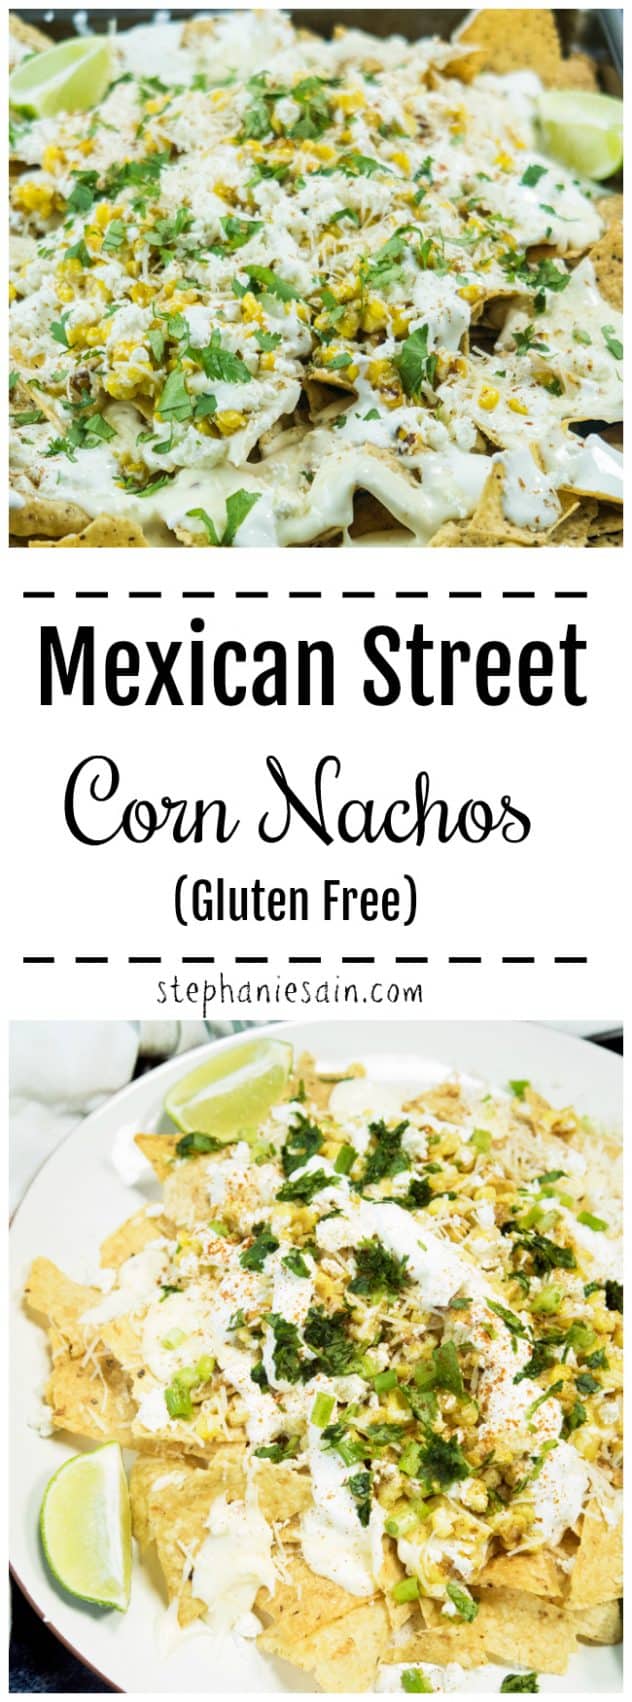 These Mexican Street Corn Nachos are perfect for game day, a party appetizer, or even dinner. Roasted corn topped on crunchy nachos and layered with creamy cheese sauce, cilantro, onions & sour cream. Gluten Free.